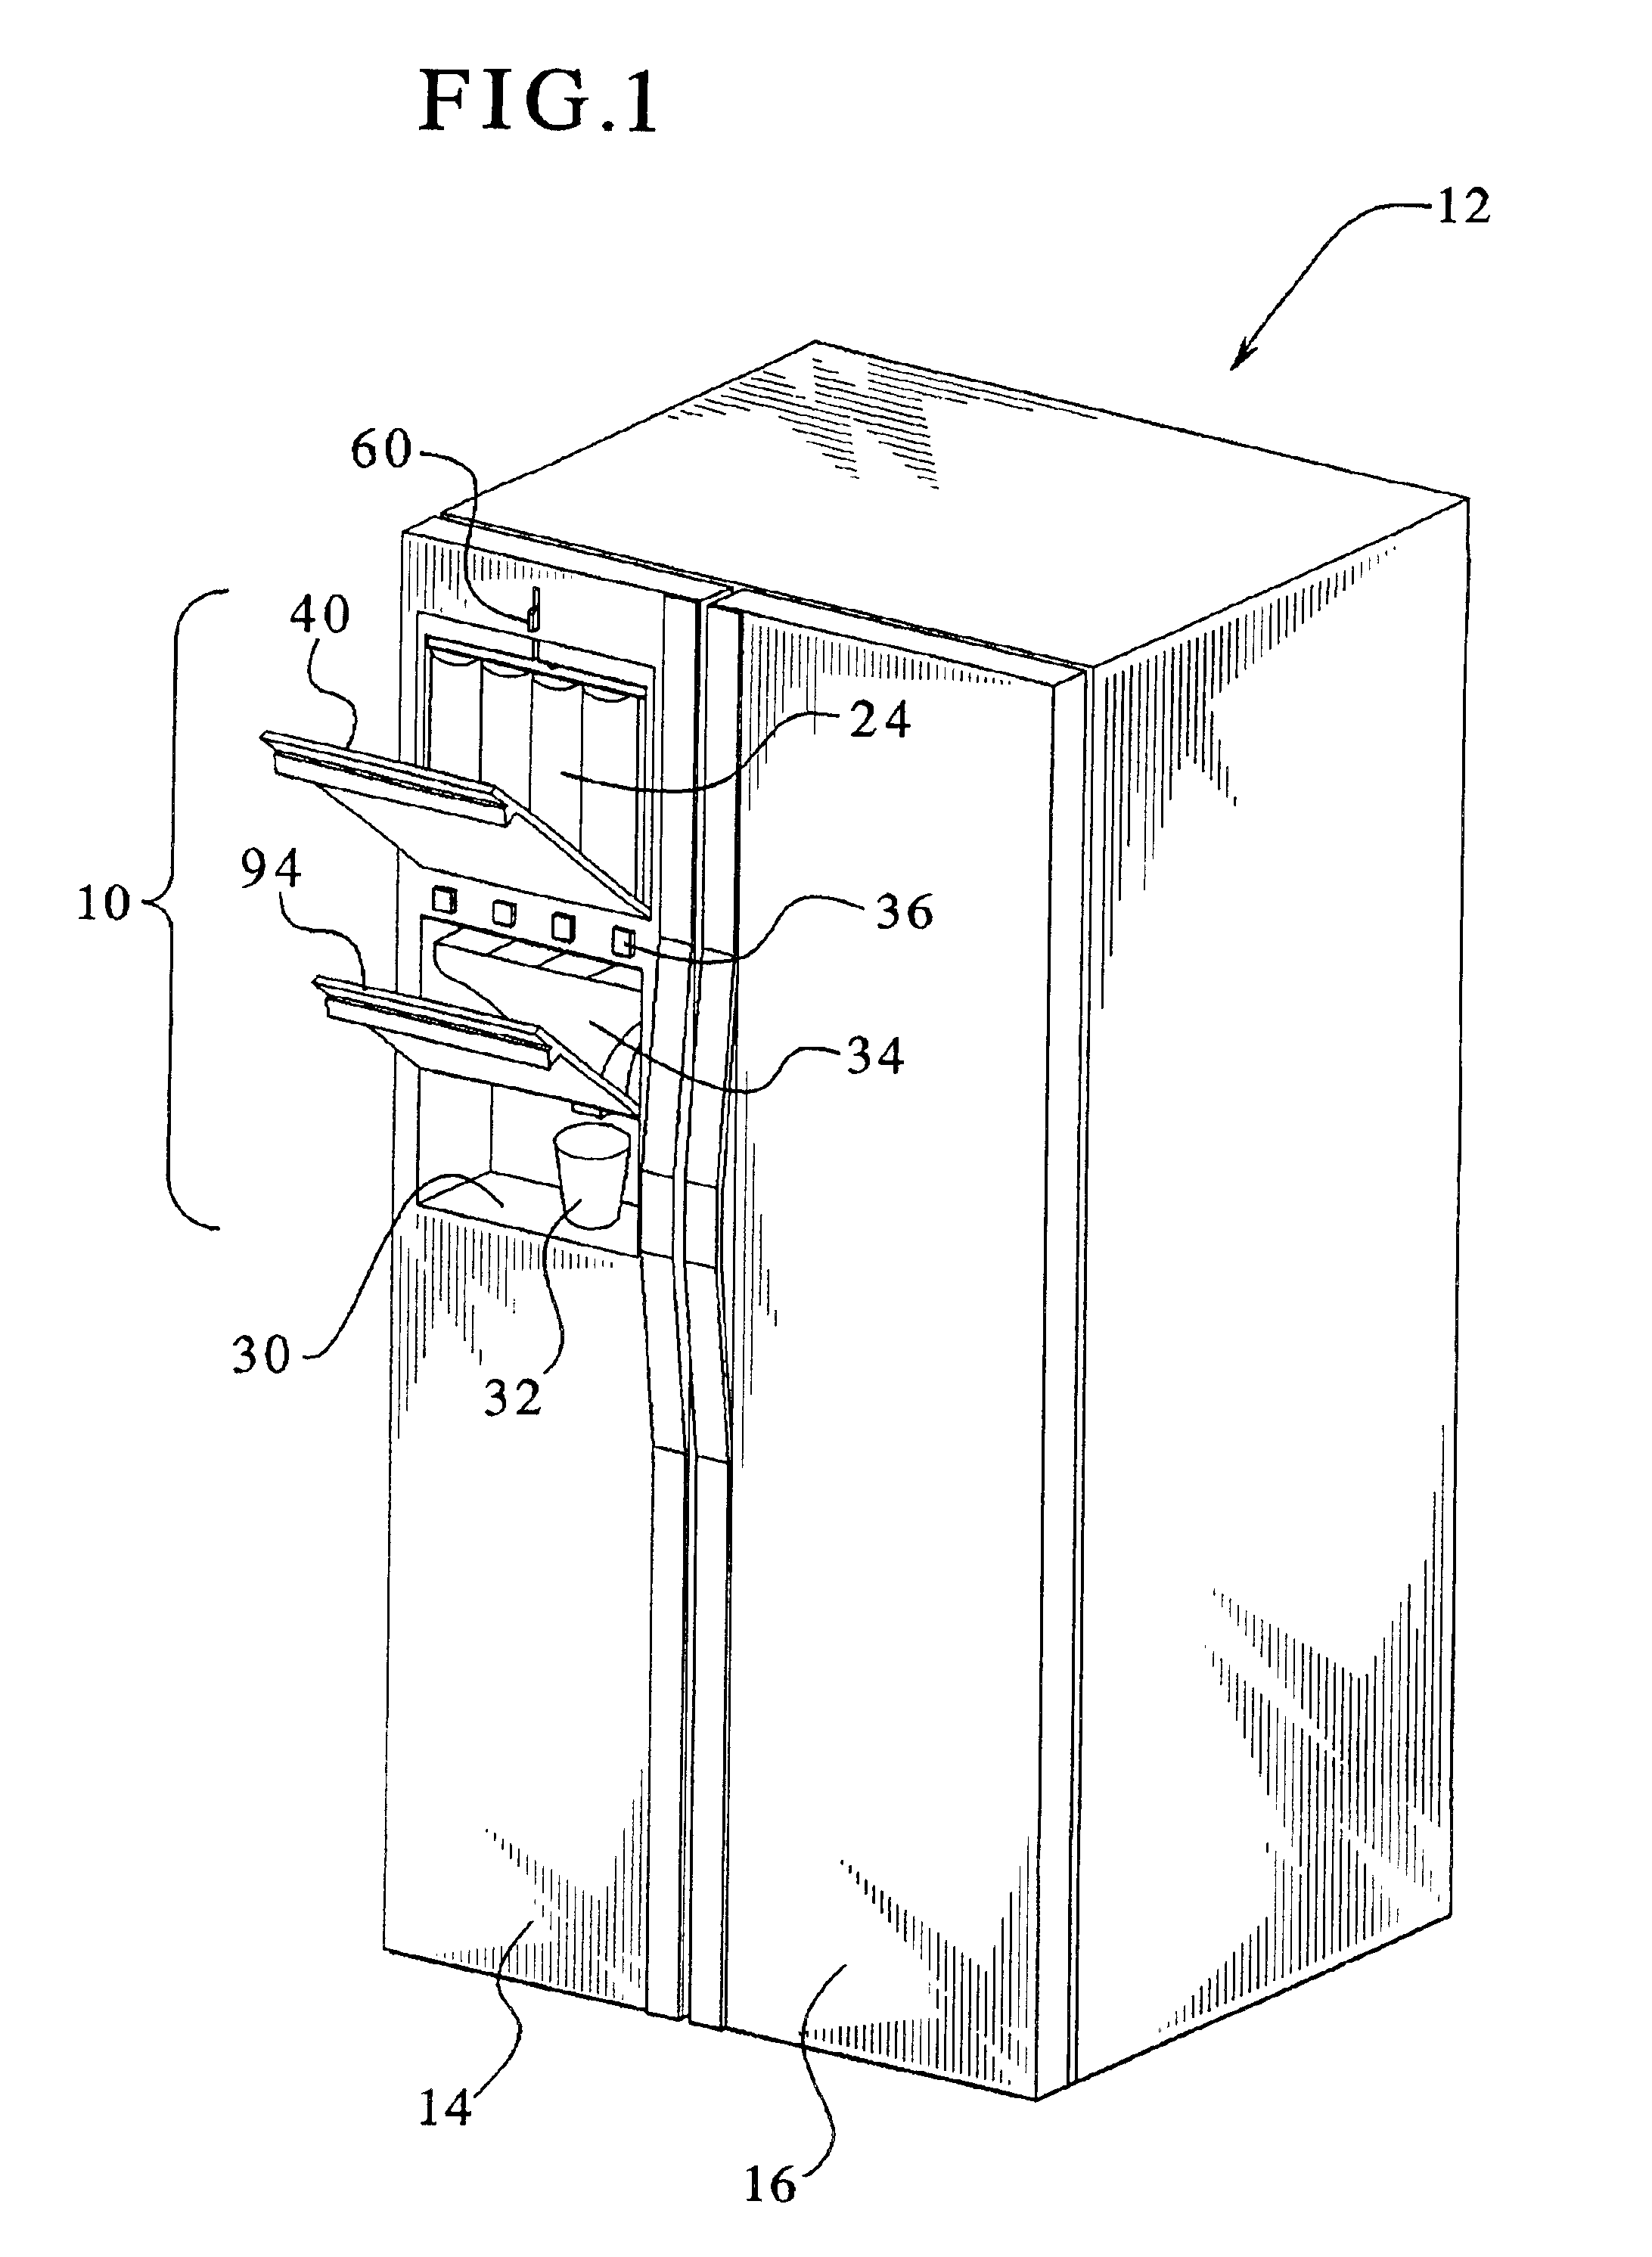 Drink supply canister for beverage dispensing apparatus